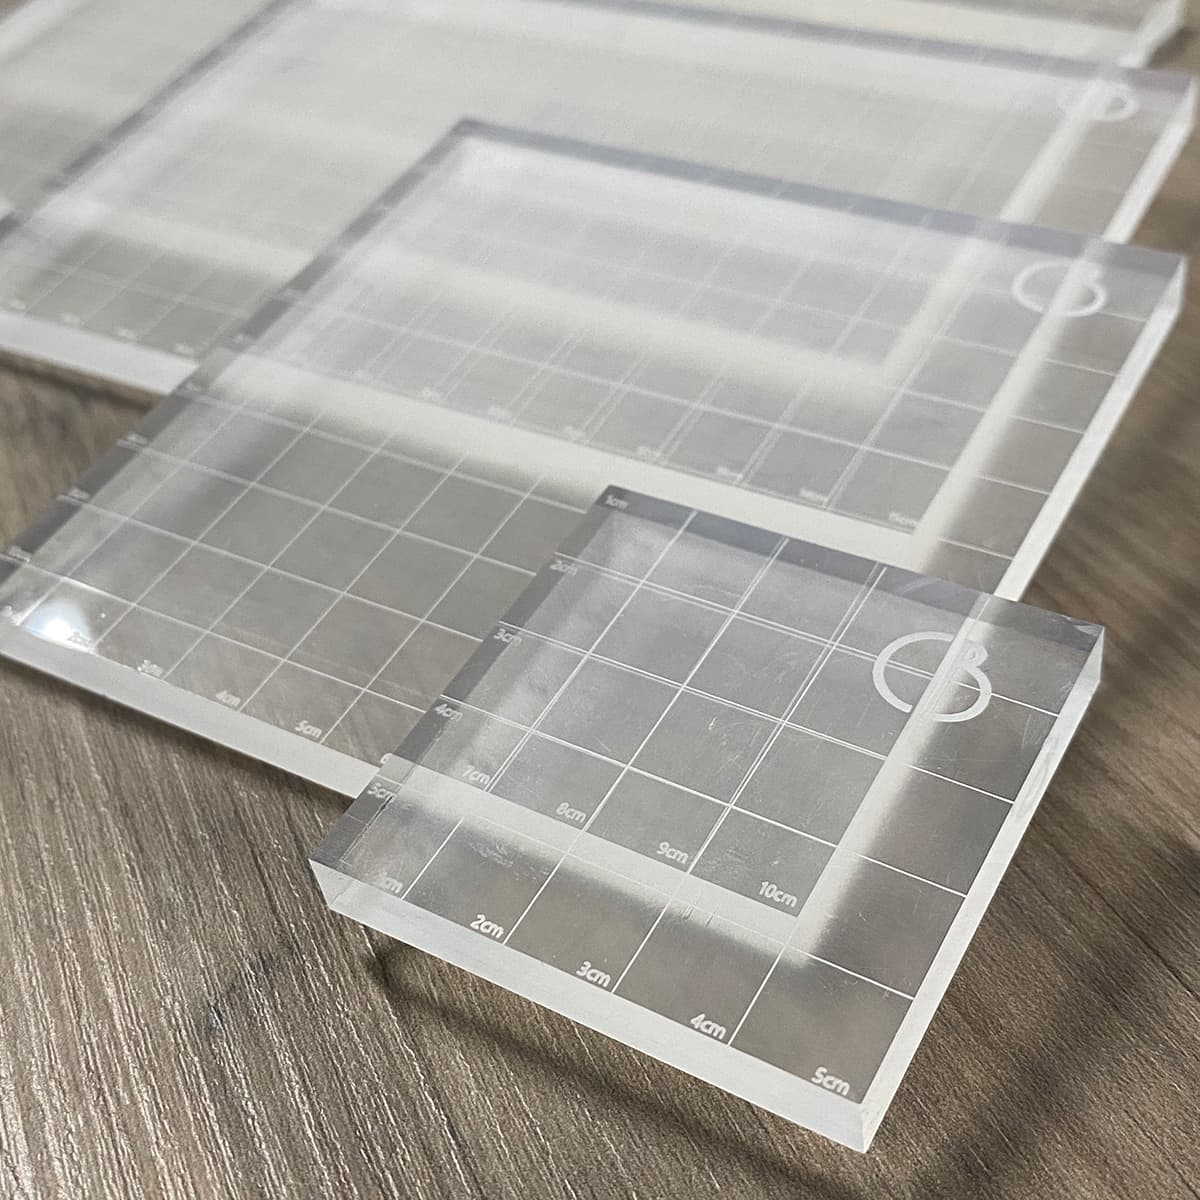 MMT204 - 3 x 6 Awesome Acrylic Block